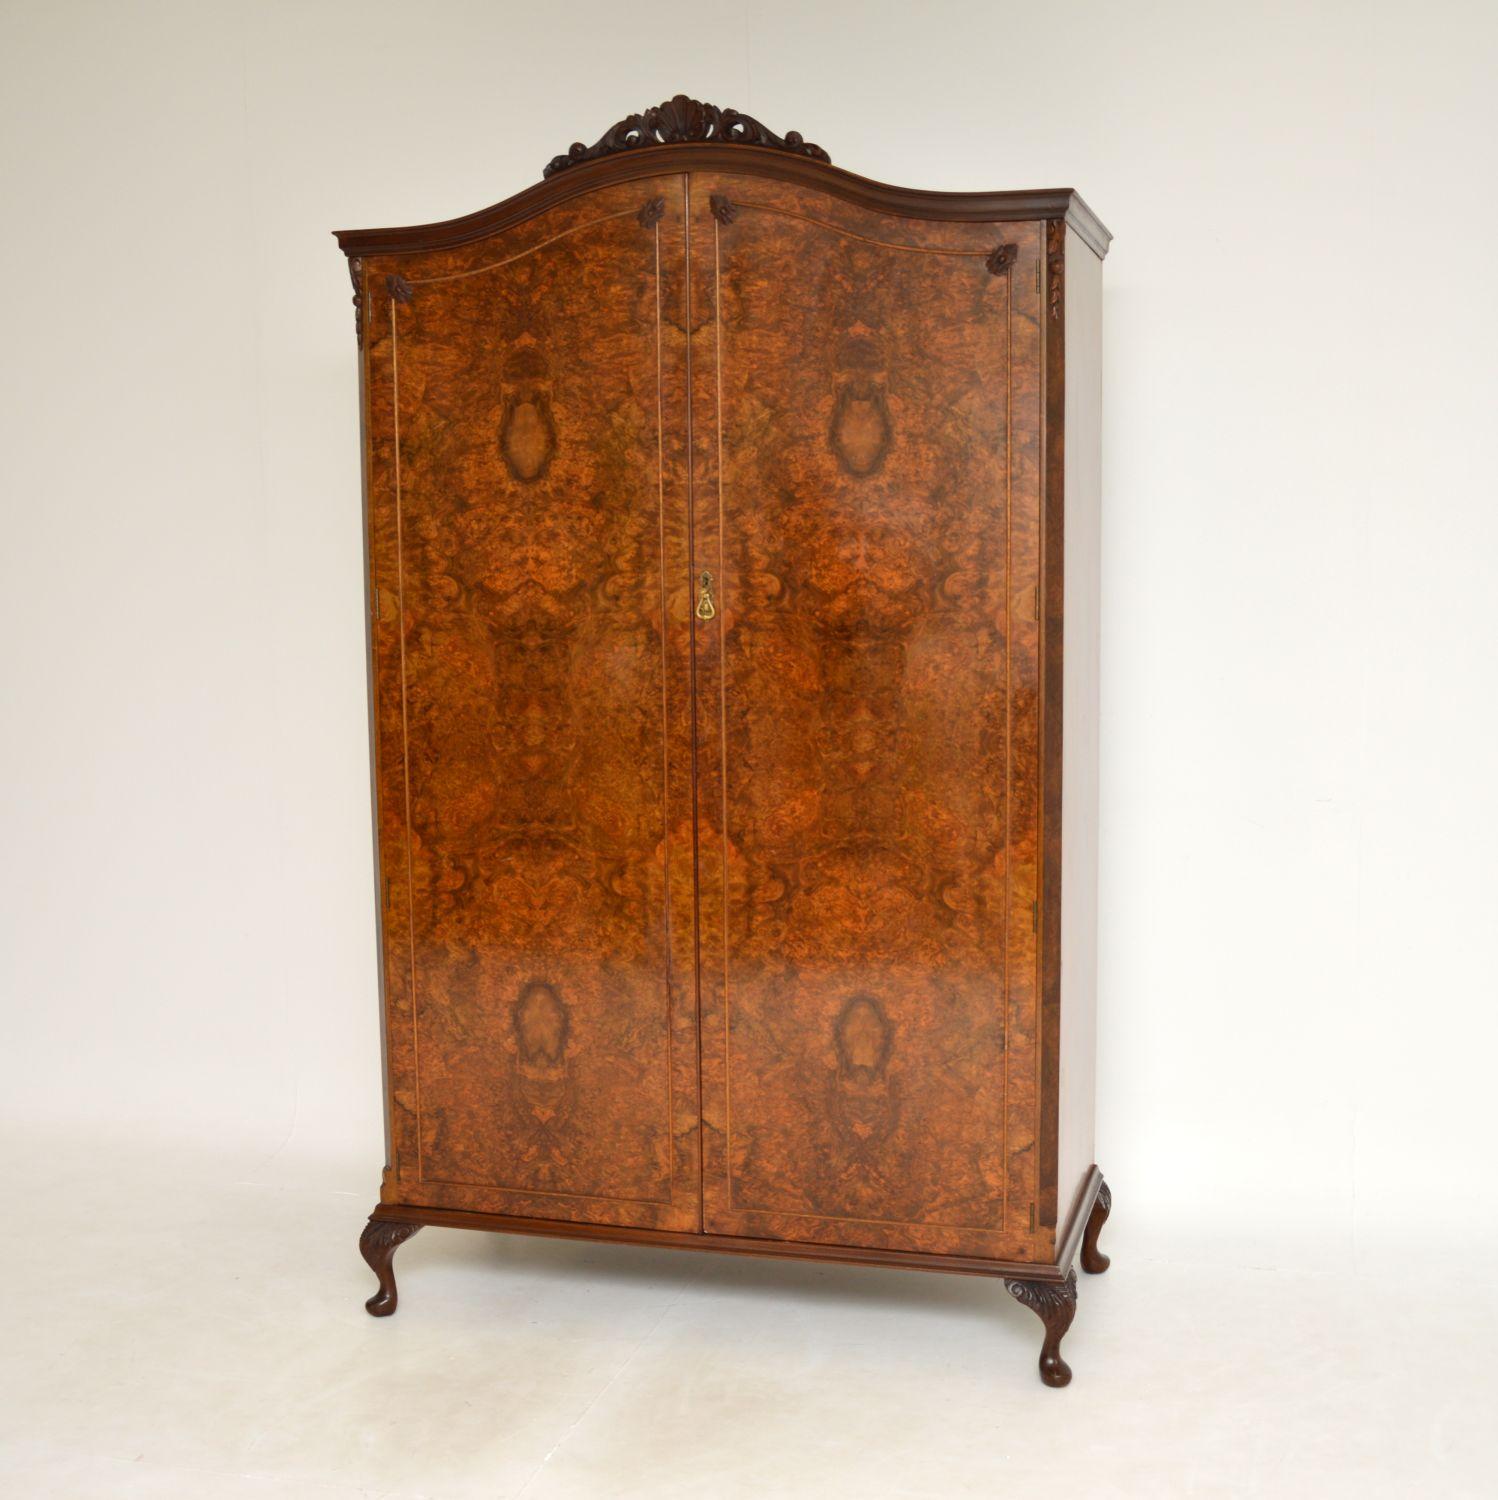 A very practicable and large walnut wardrobe in the antique Queen Anne style. This was made in England, it dates from around the 1930s period.

It is of super quality, with lots of storage space. The front is beautifully made from burr walnut, the